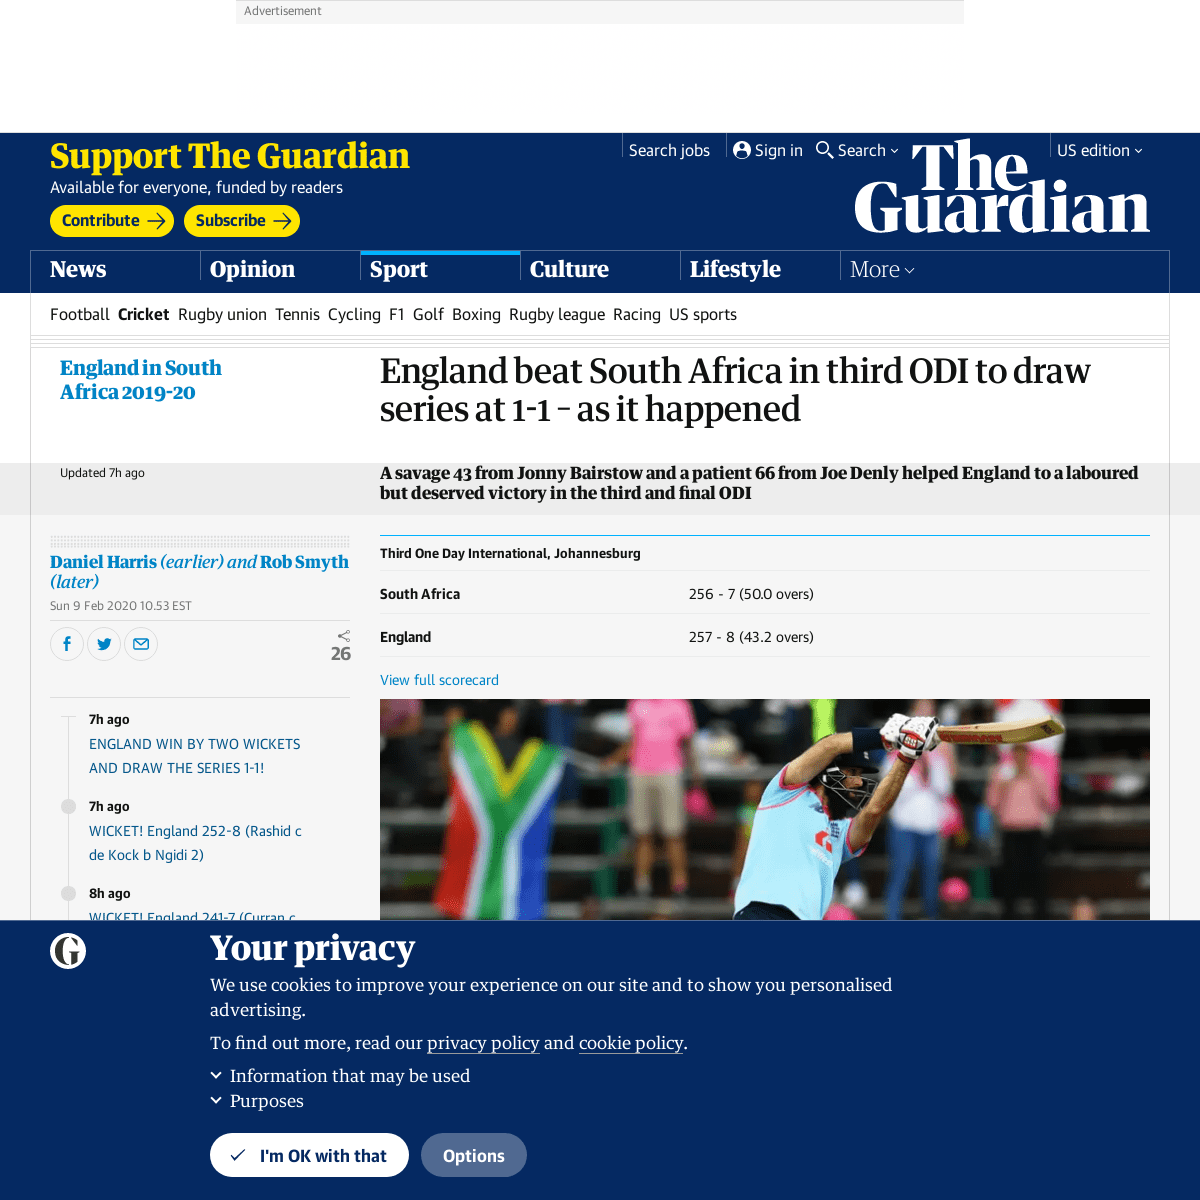 A complete backup of www.theguardian.com/sport/live/2020/feb/09/south-africa-england-third-odi-live